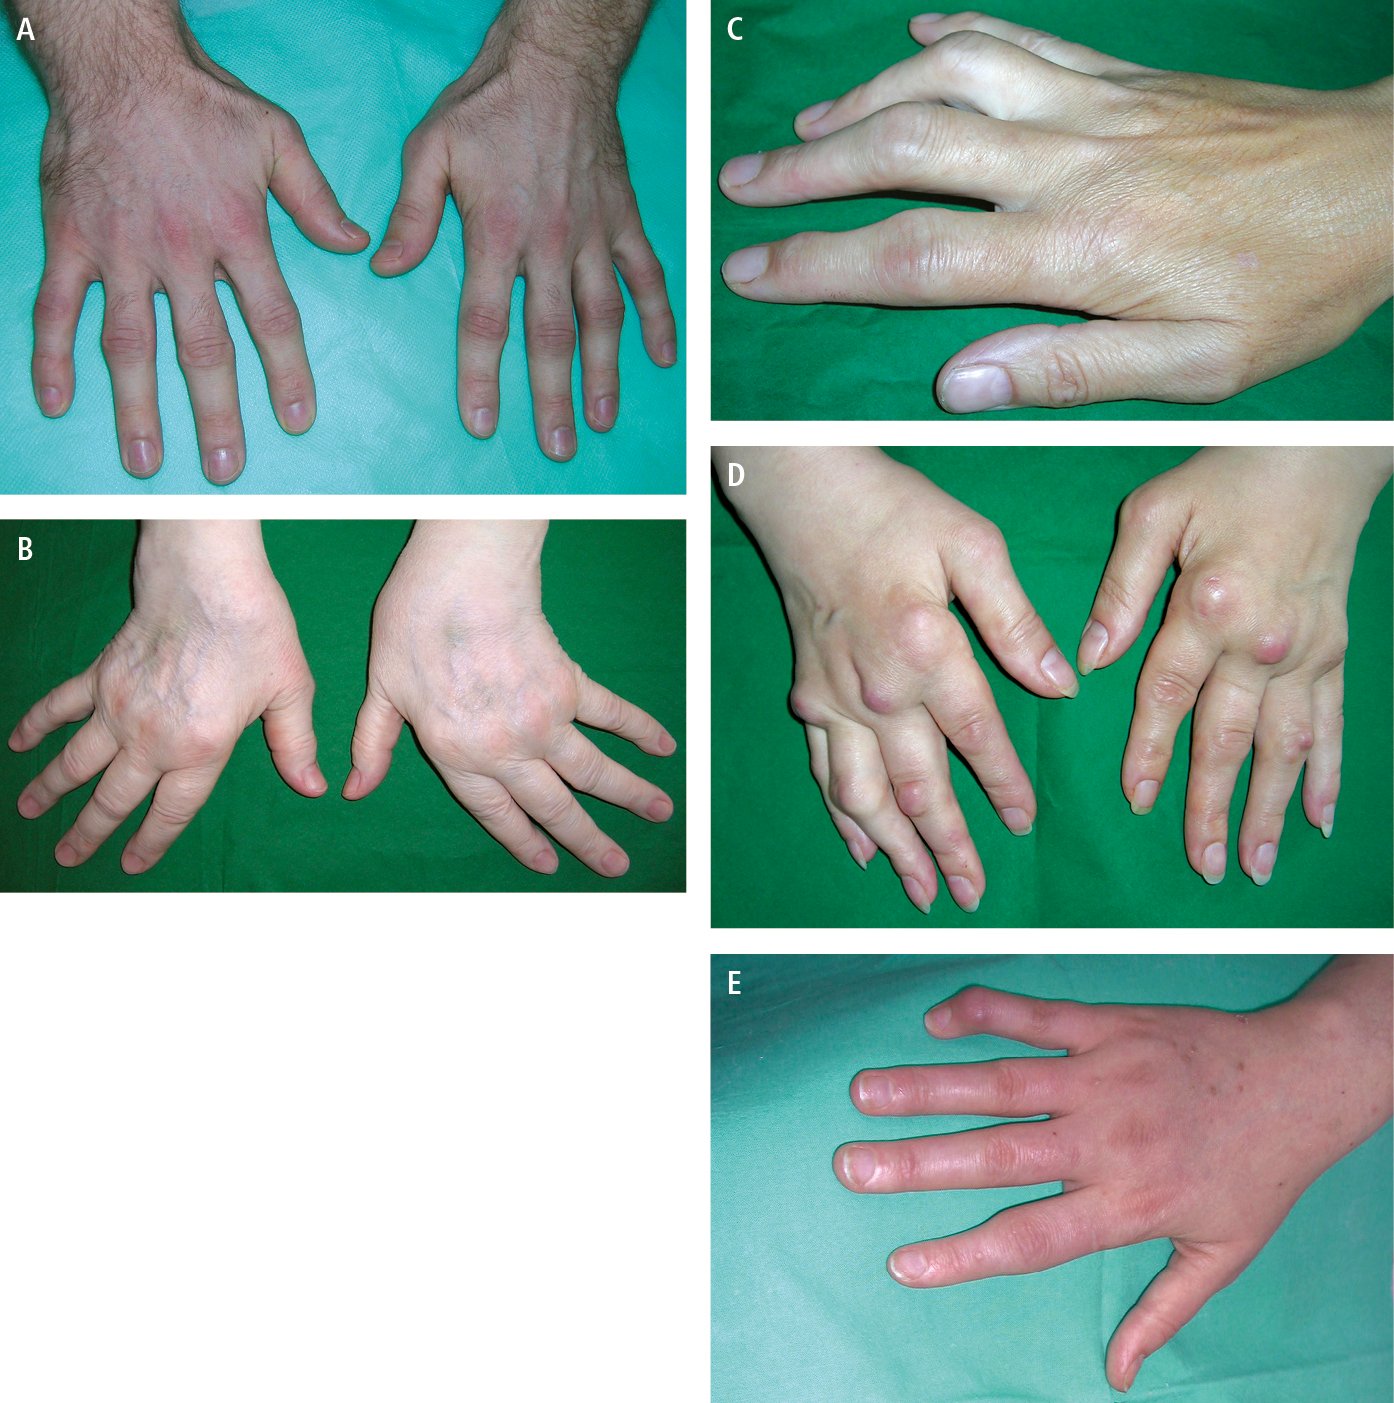 Figure 031_6592.  Rheumatoid arthritis.  A , early changes: symmetric swelling of the metacarpophalangeal and proximal interphalangeal joints.  B , ulnar deviation of the fingers and subluxation of the metacarpophalangeal joints.  C , boutonnière deformity (fingers III and IV).  D , swelling of the metacarpophalangeal and proximal interphalangeal joints, subluxation of the metacarpophalangeal joints, numerous rheumatoid nodules around the joints.  E , swan-neck deformity of the little finger. 